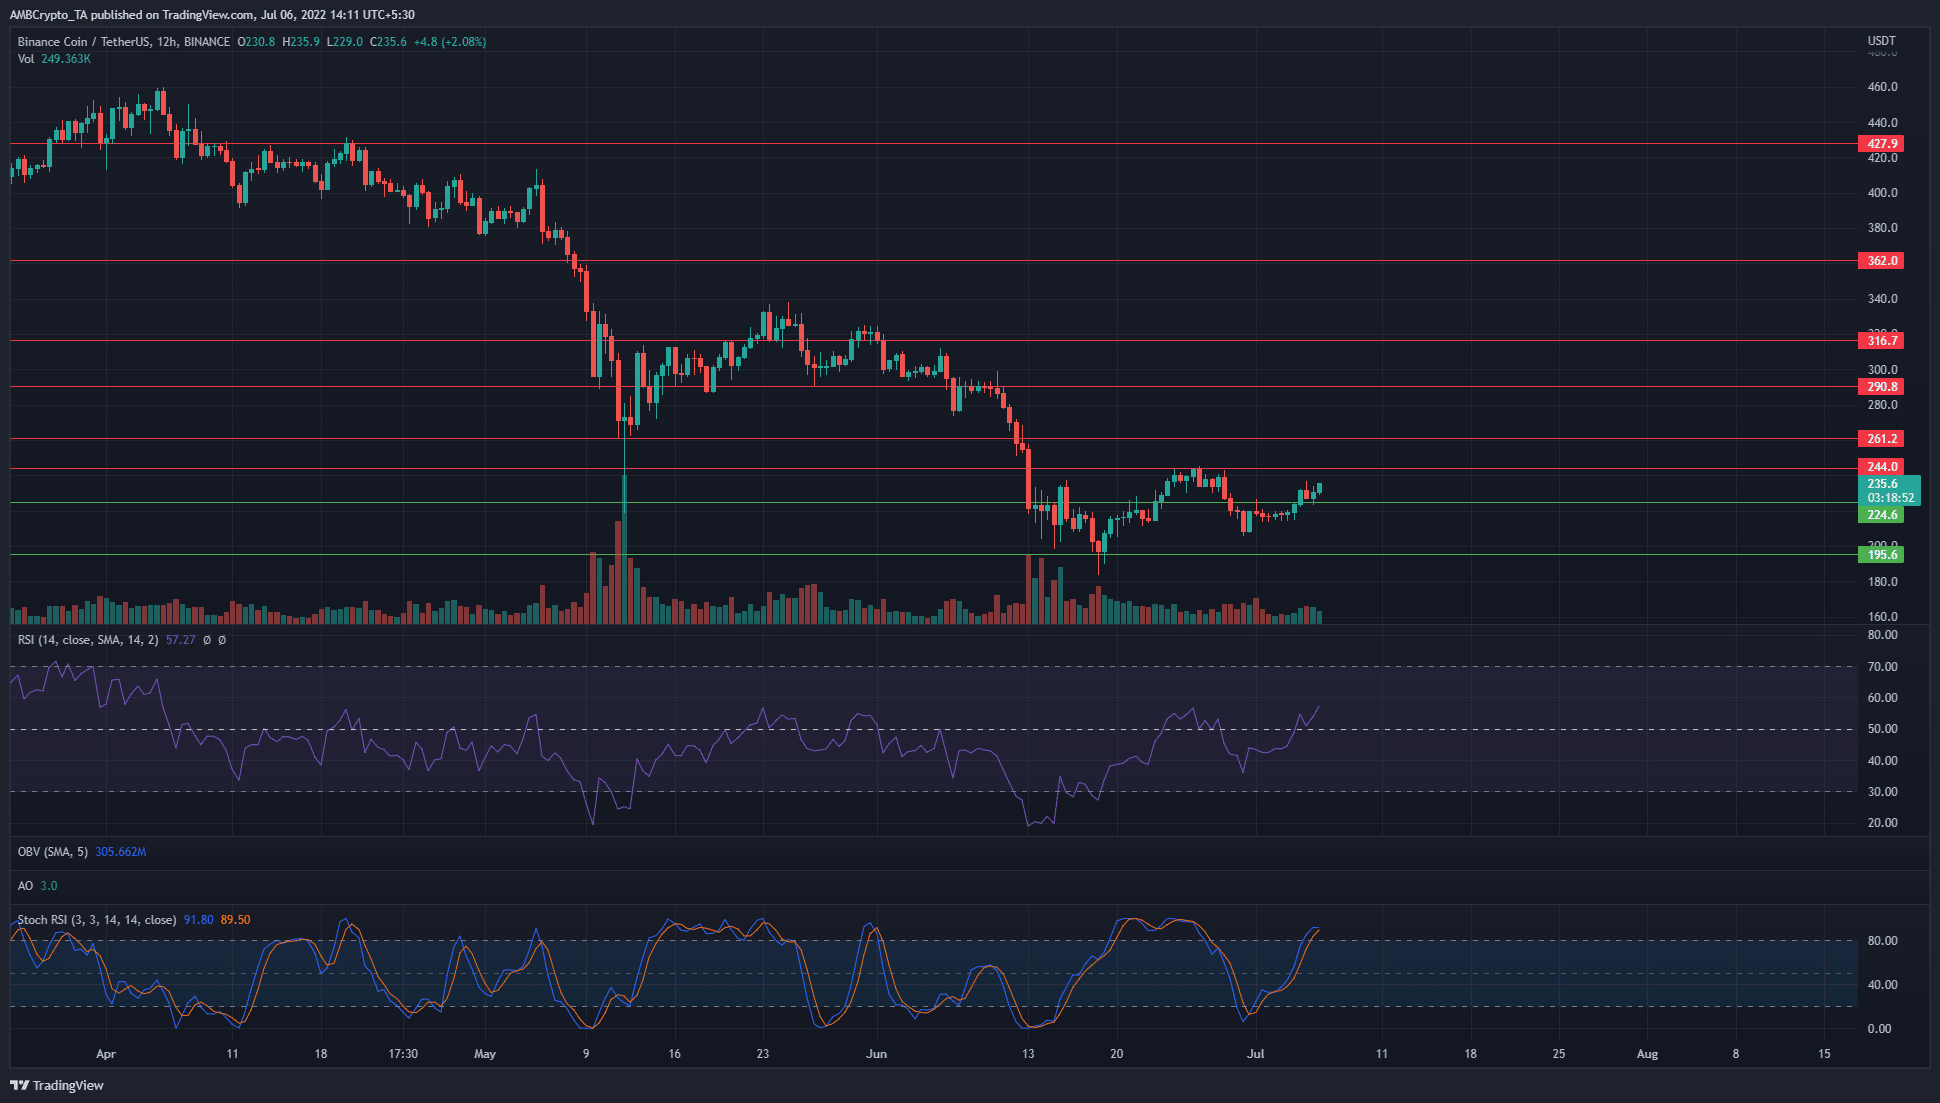 Binance Coin showed a range formation, watch out for these areas to buy and sell